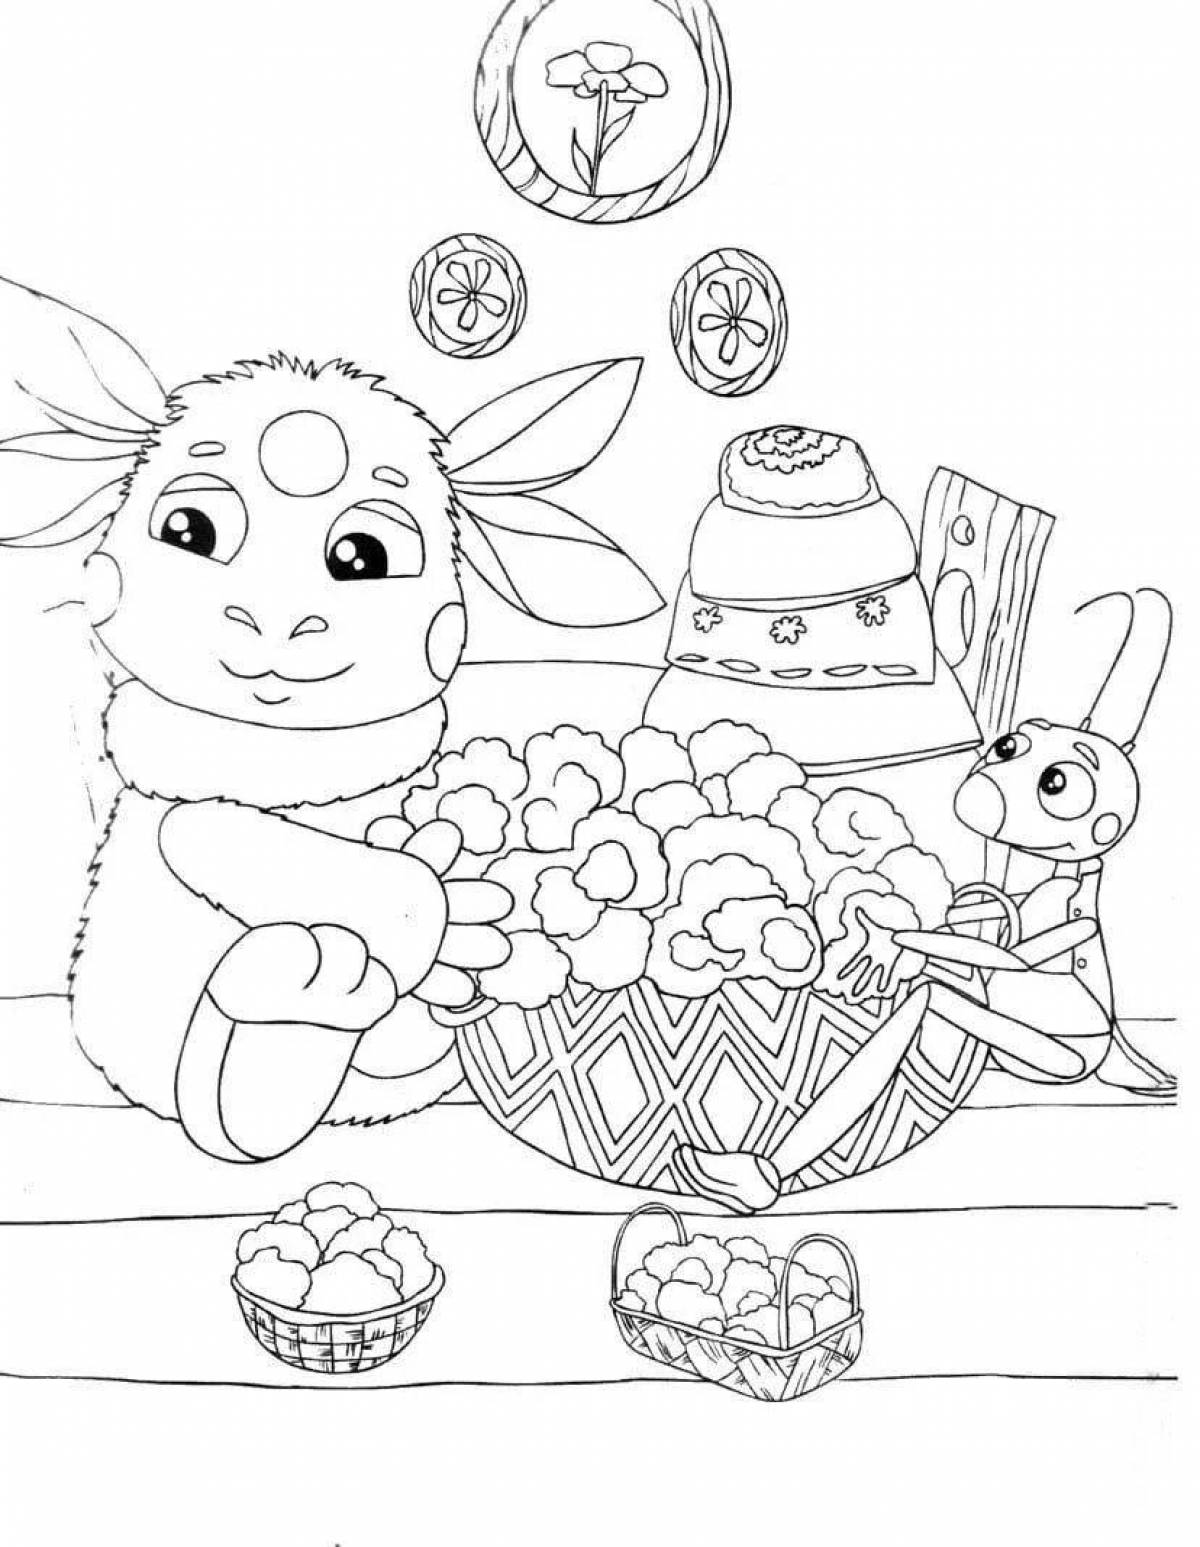 Merry Luntik new year coloring book